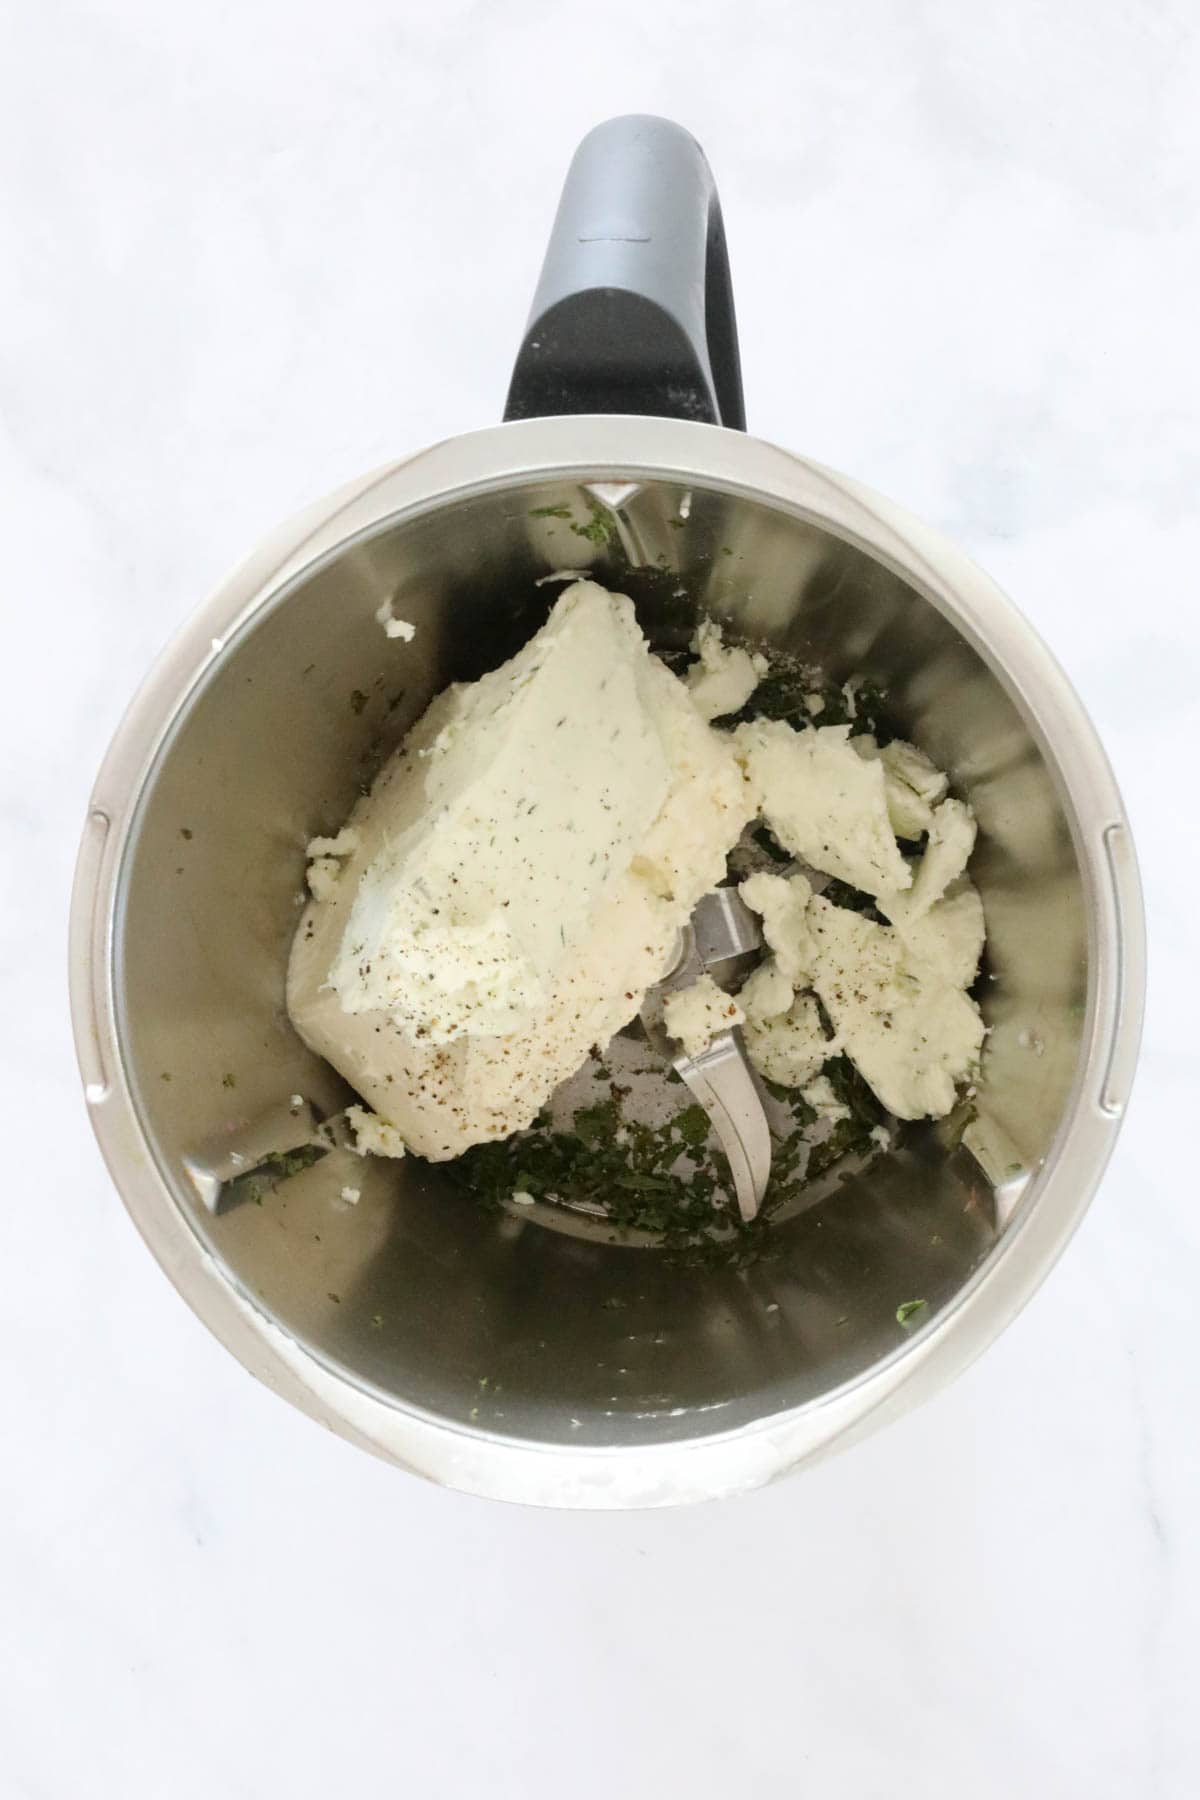 Cheese and herbs in a Thermomix.